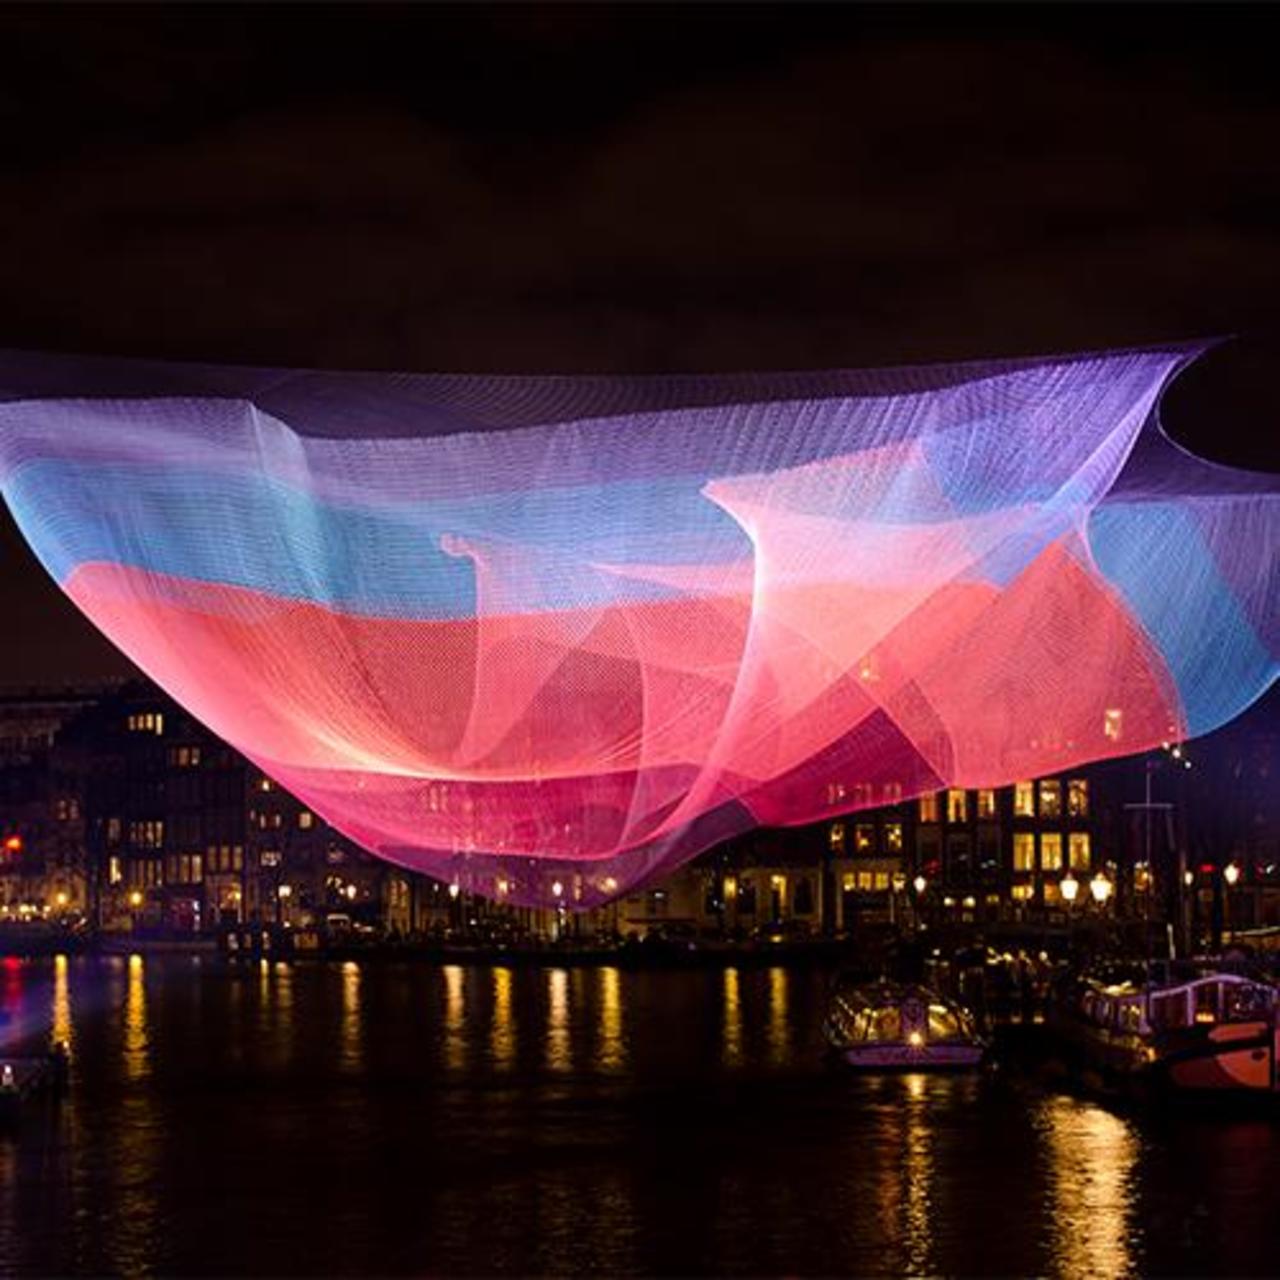 Extra #light for this fall. Oct15-18 #Signal2015  #installations and #videomapping http://ow.ly/Tloph http://t.co/DIcKDbulXX